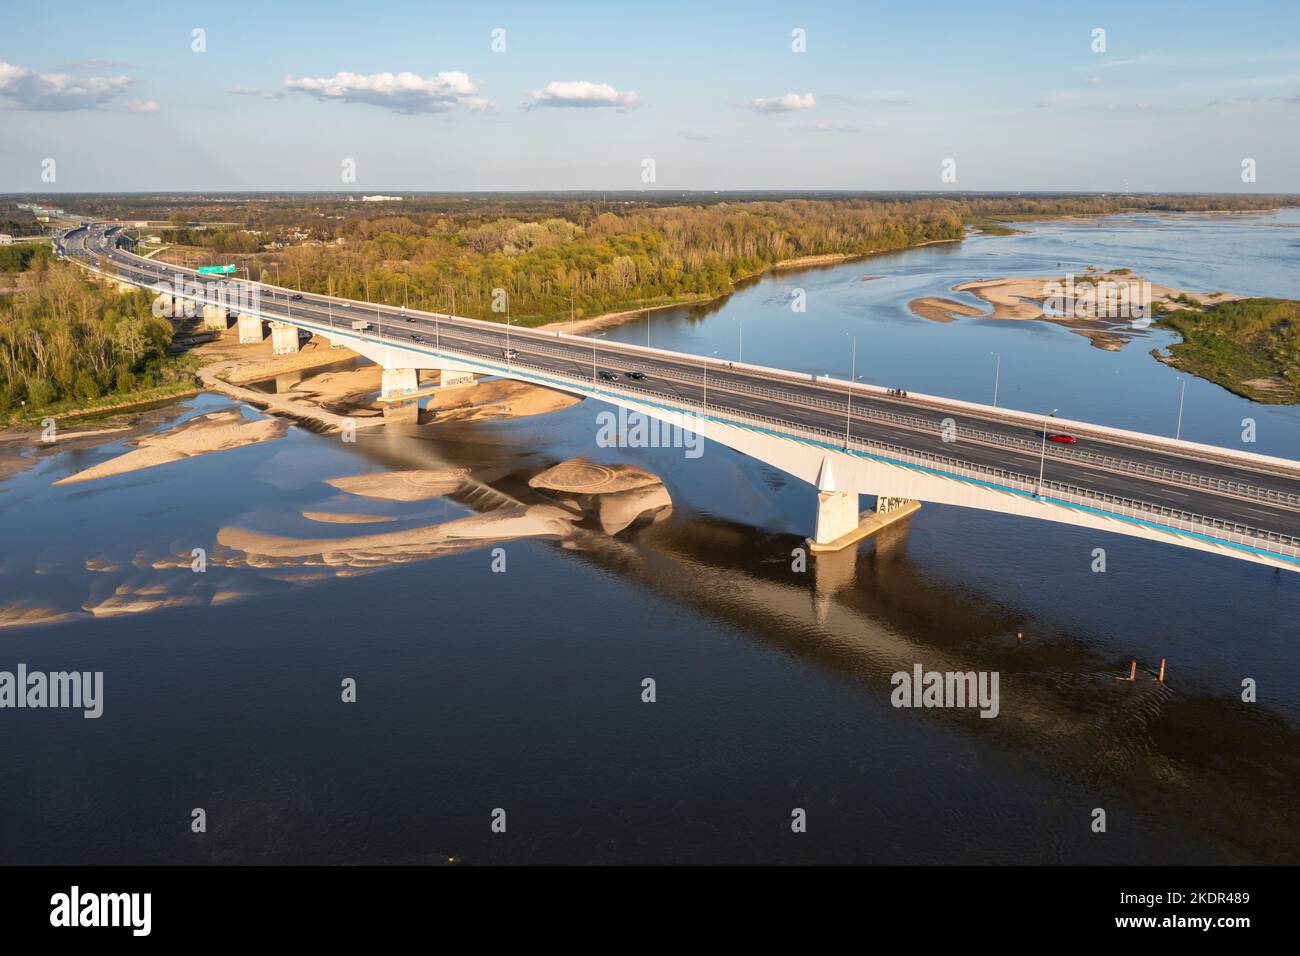 Aerial view of Anna Jagiellon Bridge also called South Bridge, part of S2 expressway over Vistula River in Warsaw, capital of Poland Stock Photo